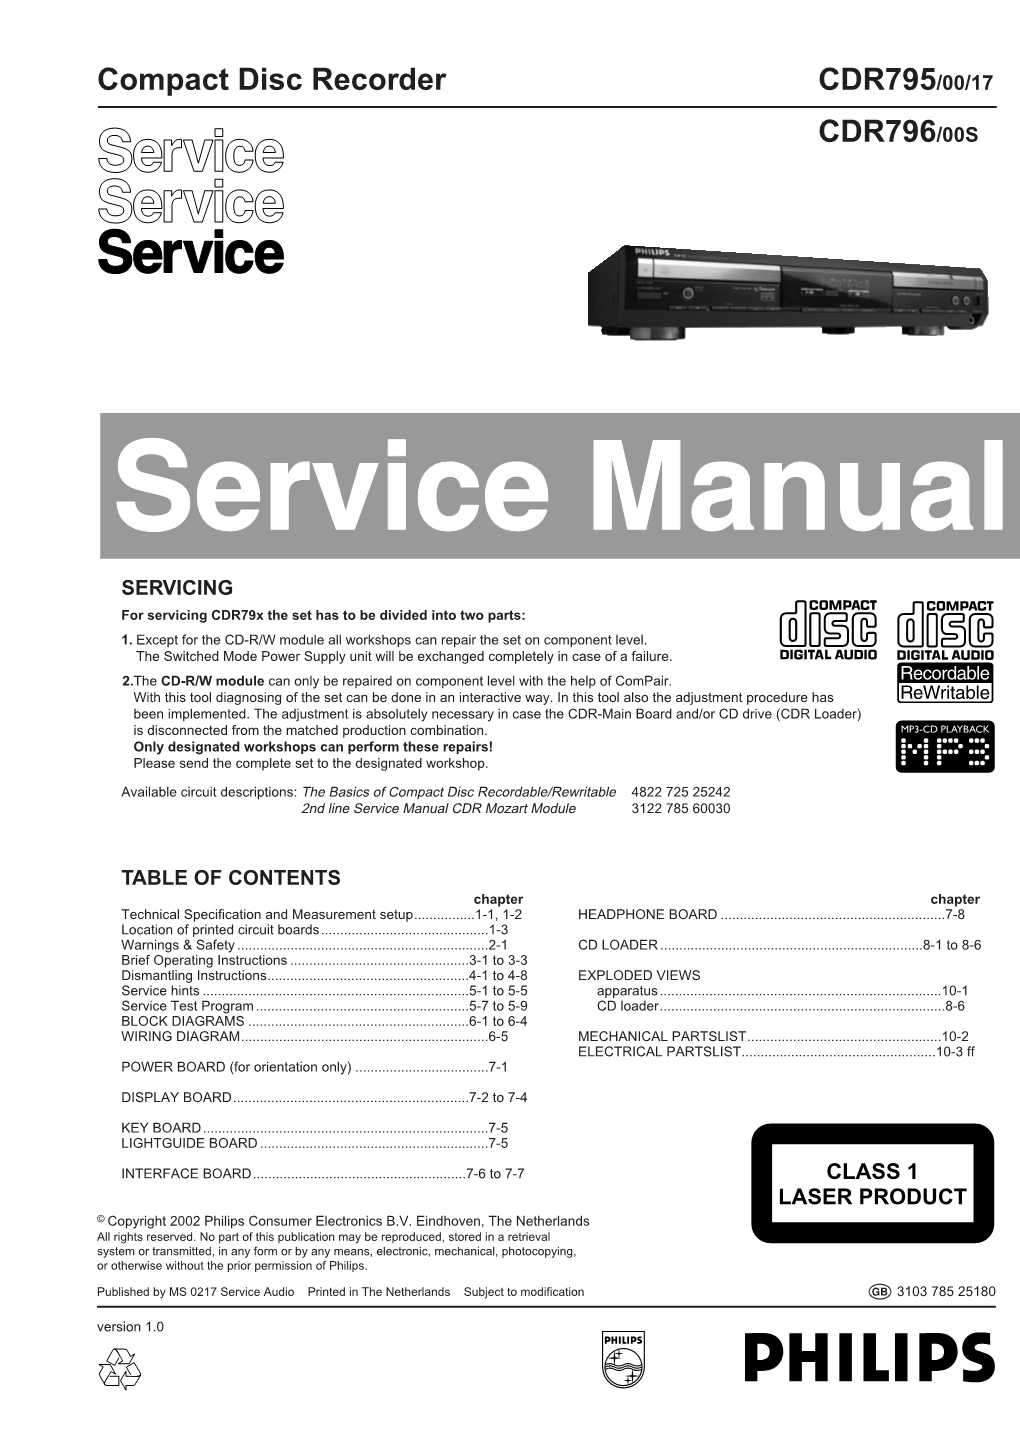 Service Manual CDR795, CDR796